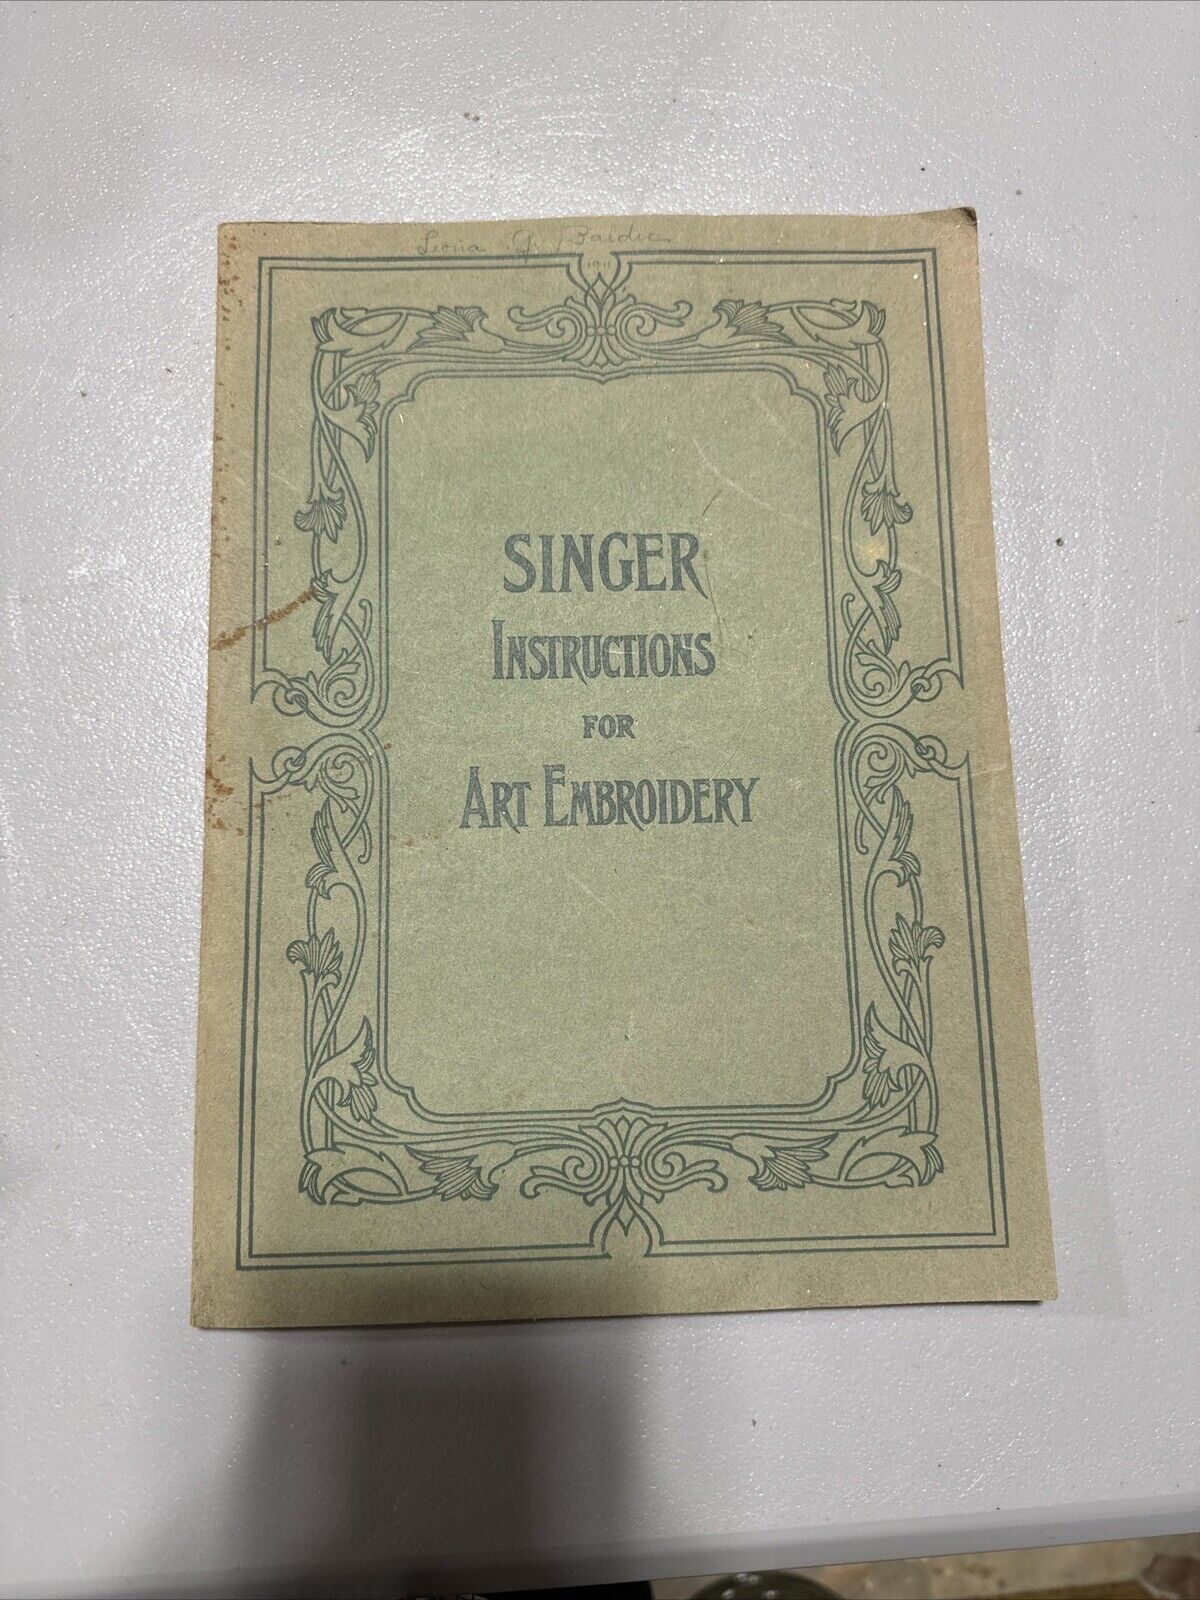 Antique Singer Instructions For Art Embroidery Book 1911. Extremely RARE